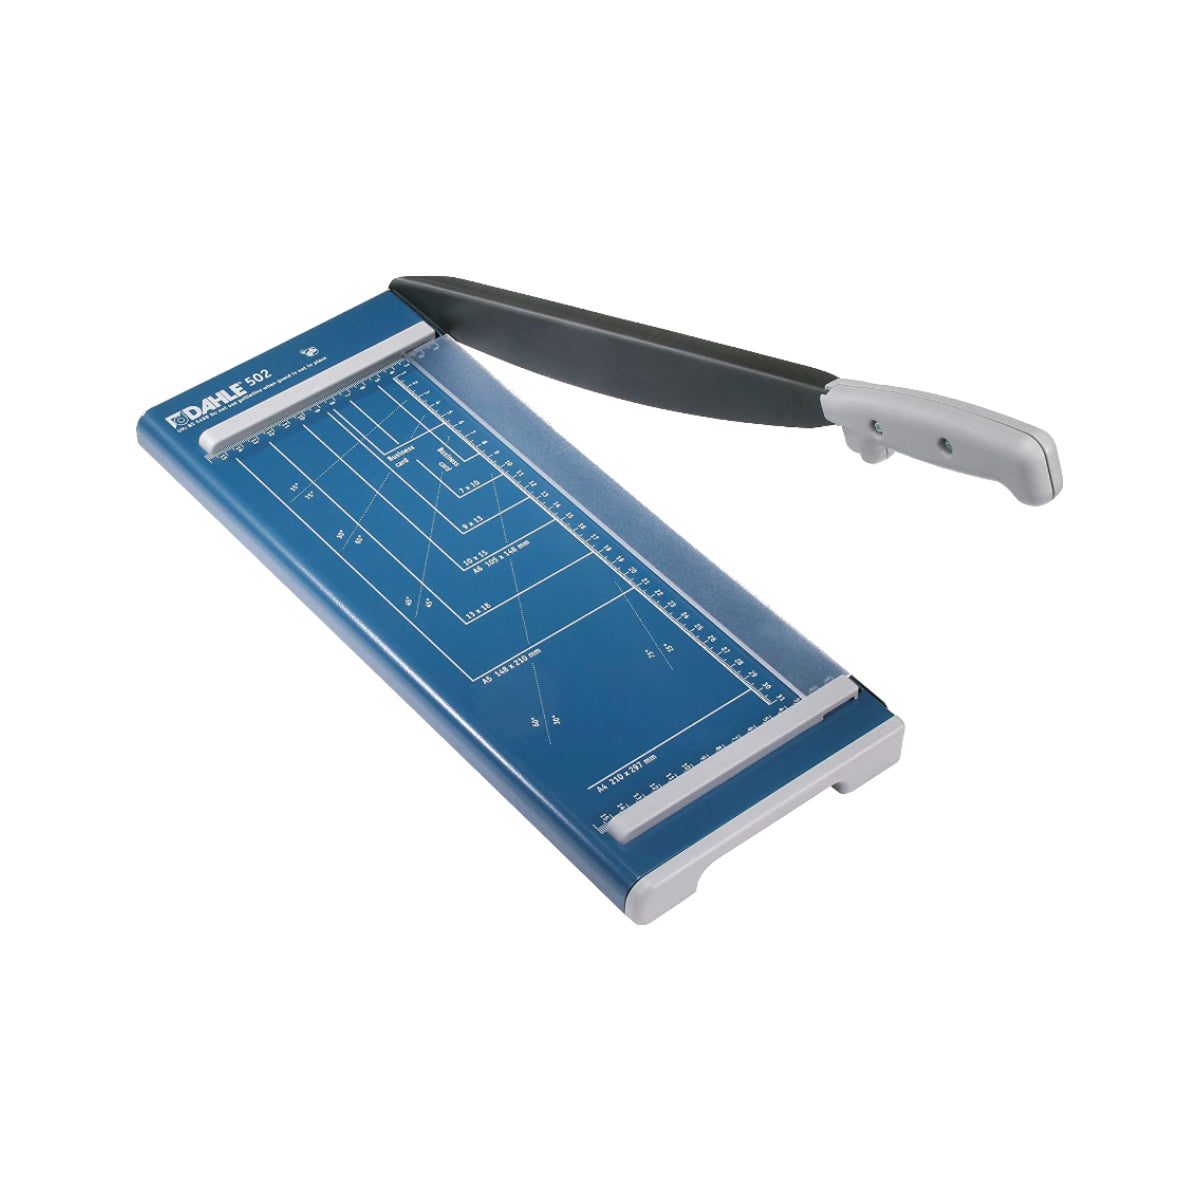 Dahle 502 Personal A4 Guillotine Cutter